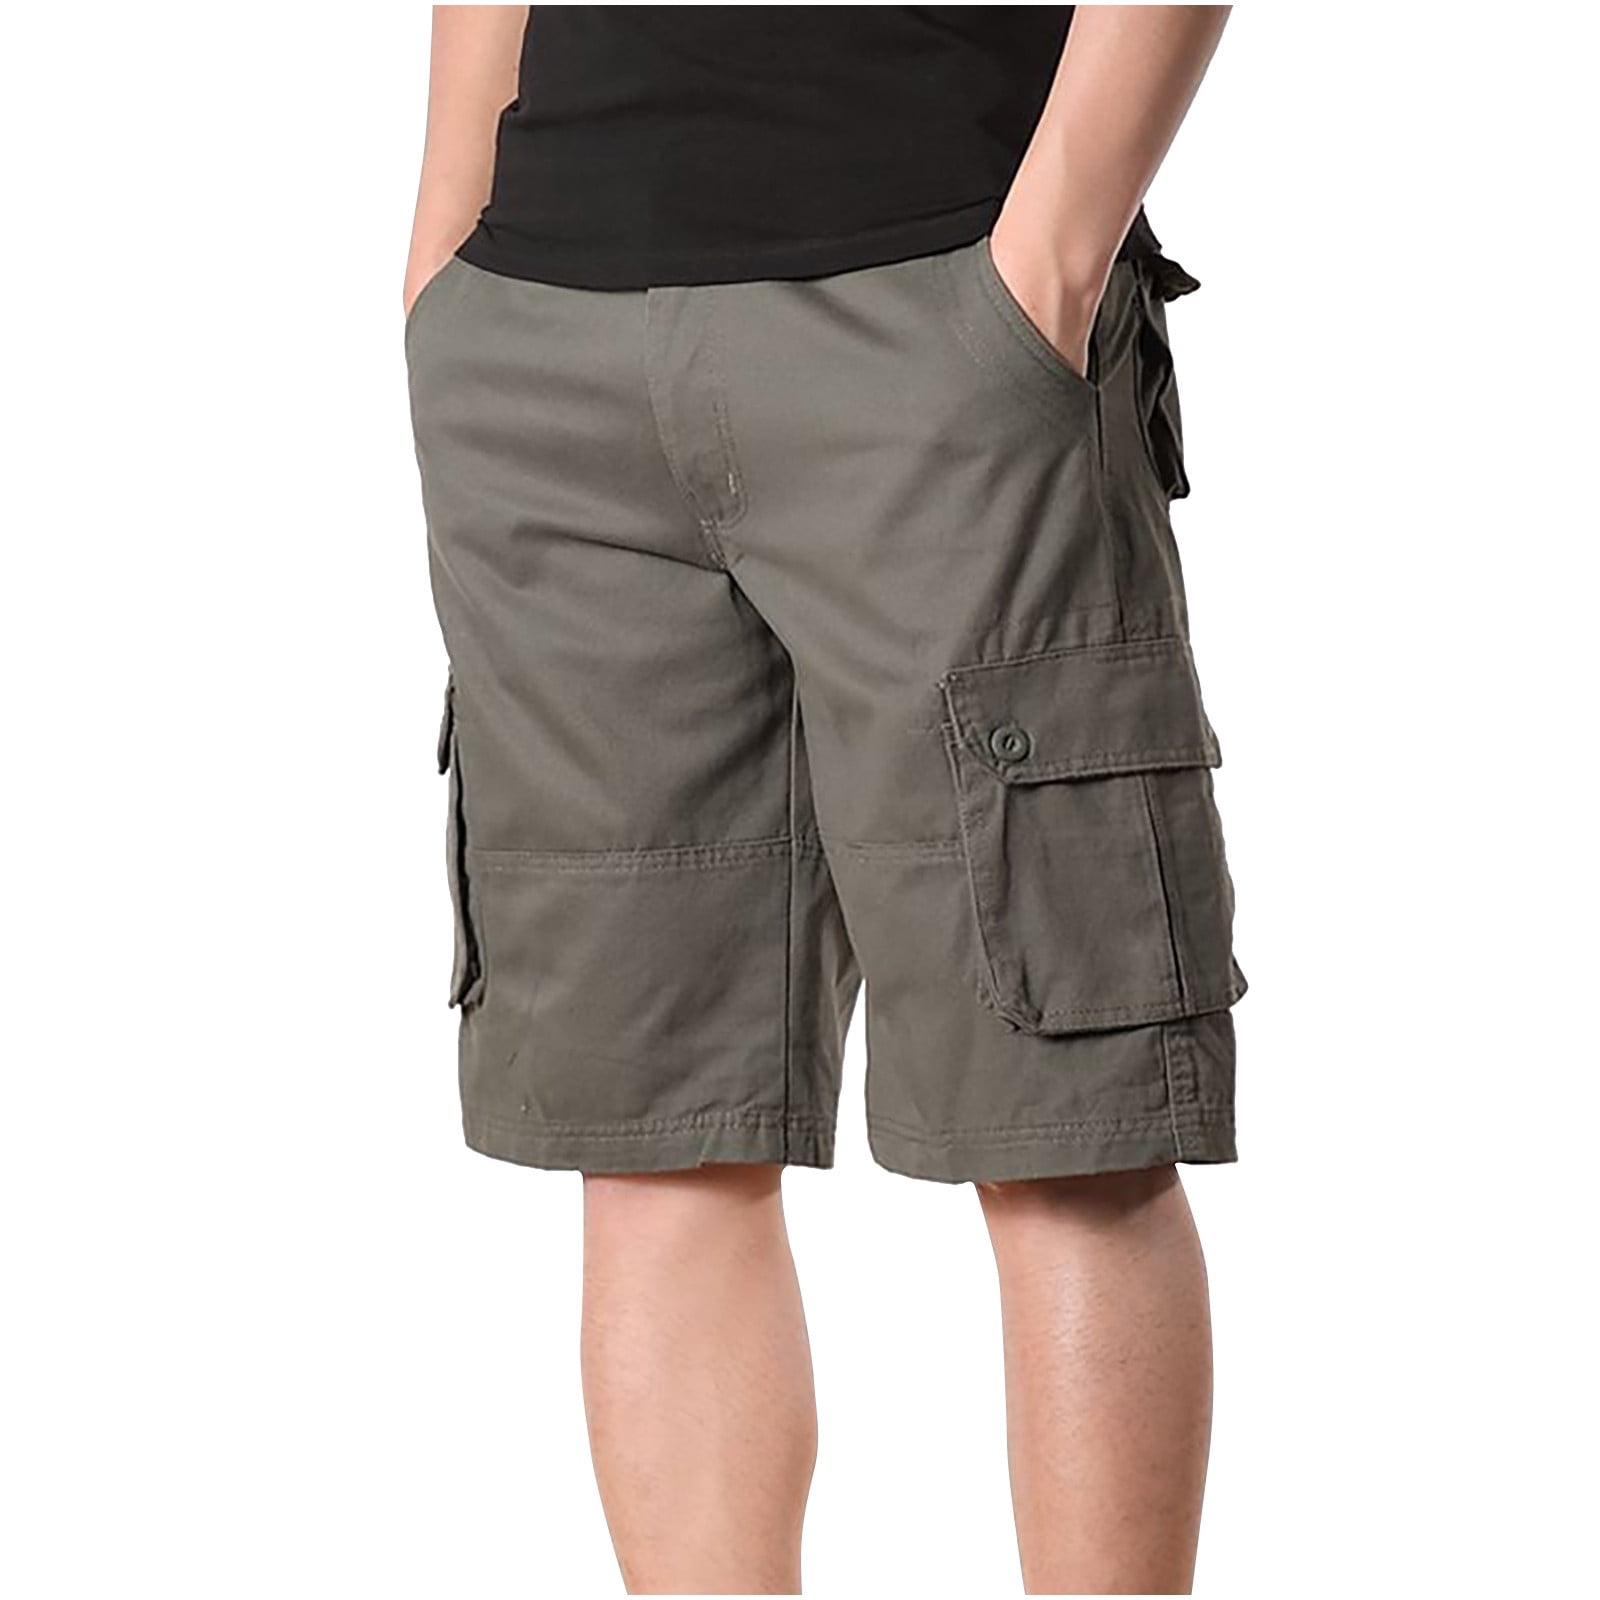 YYDGH Cargo Shorts for Men Casual Solid Cotton Tactical Work Shorts Stretch  Lightweight Summer Outdoor Shorts Gray M 